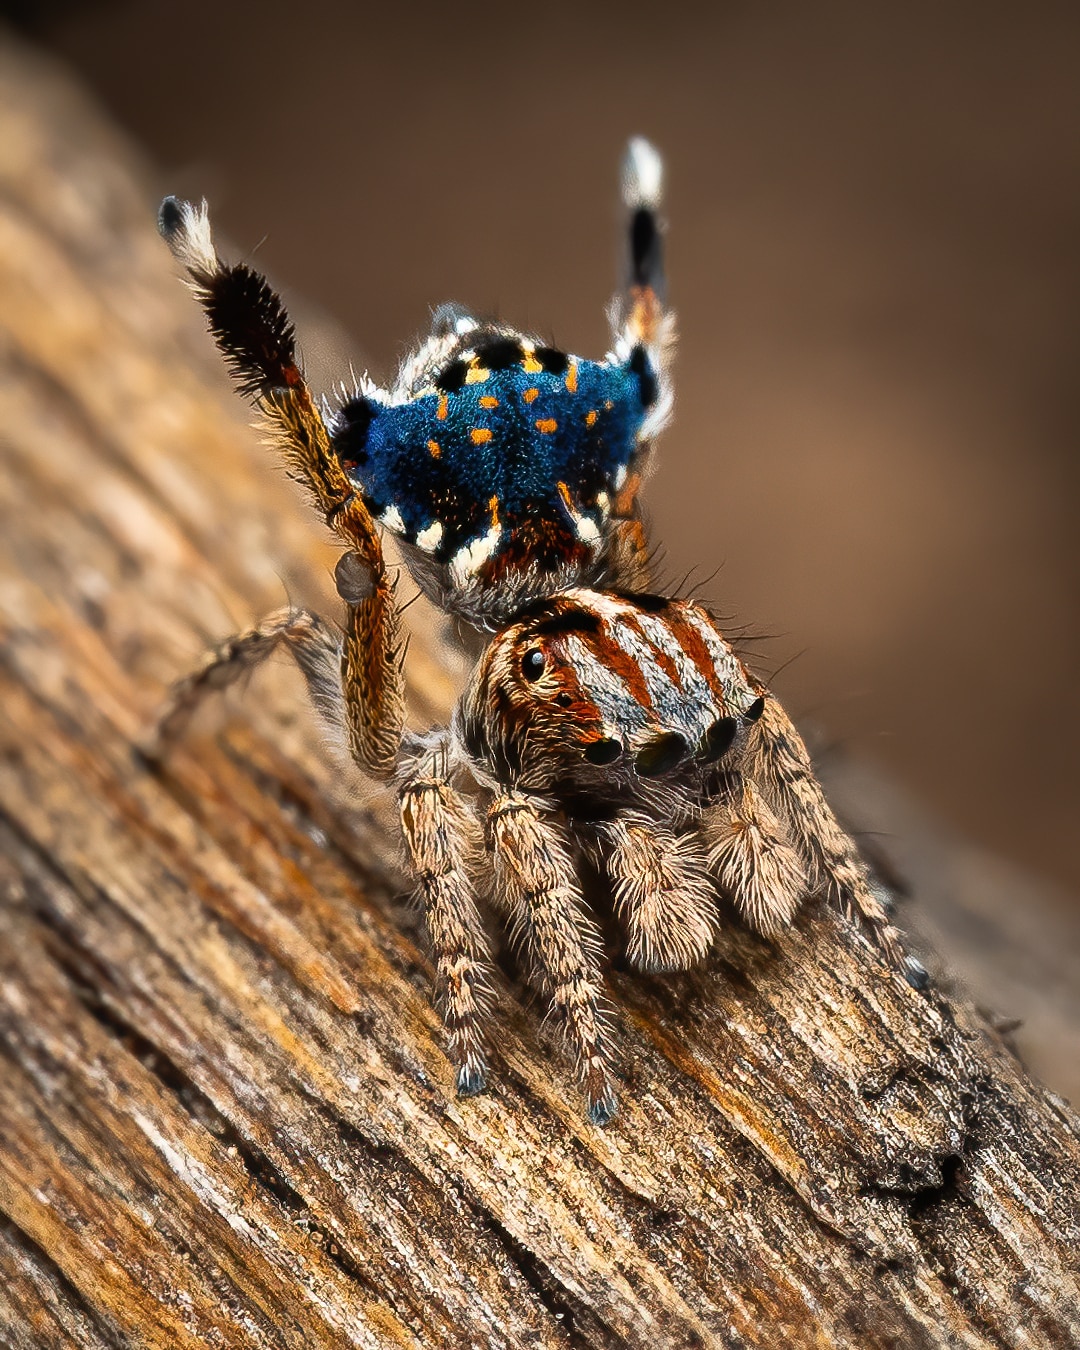 A hairy spider featuring blue, black, tan, white and orange on a light brown body